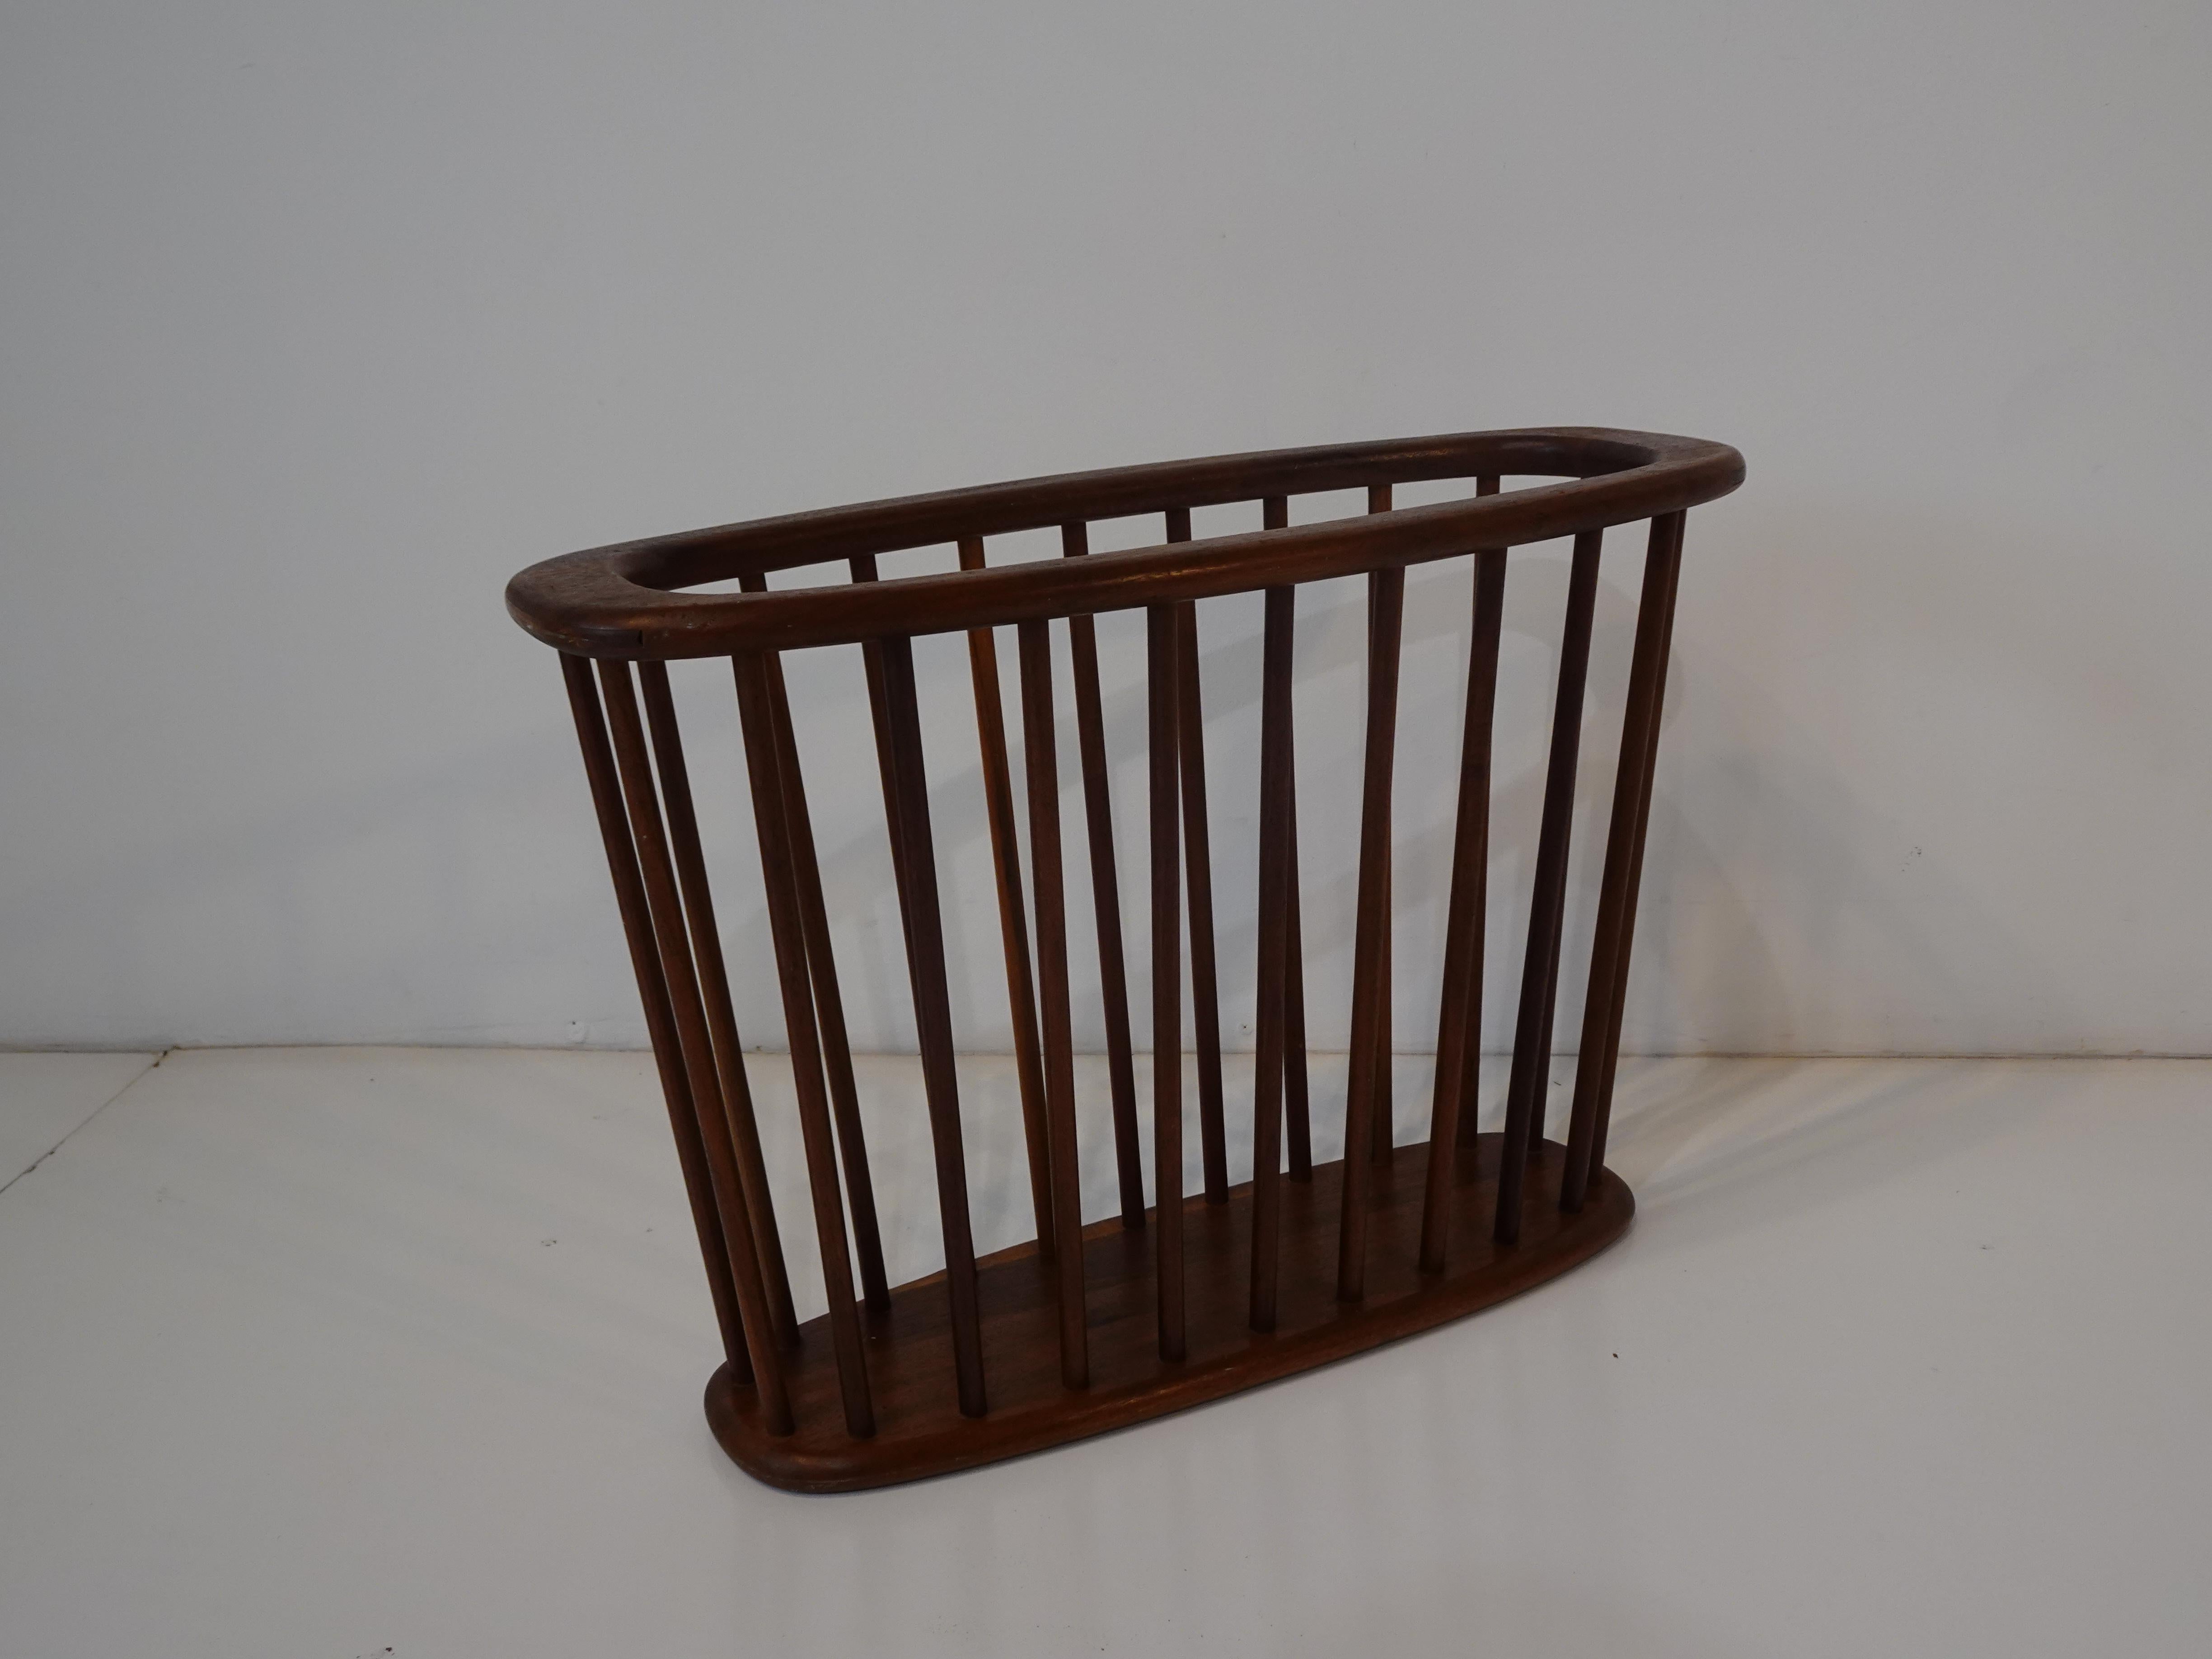 A mid century walnut magazine rack with dowel construction designed by Arthur Umanoff, very well crafted so it will hold your books or light reading materials.